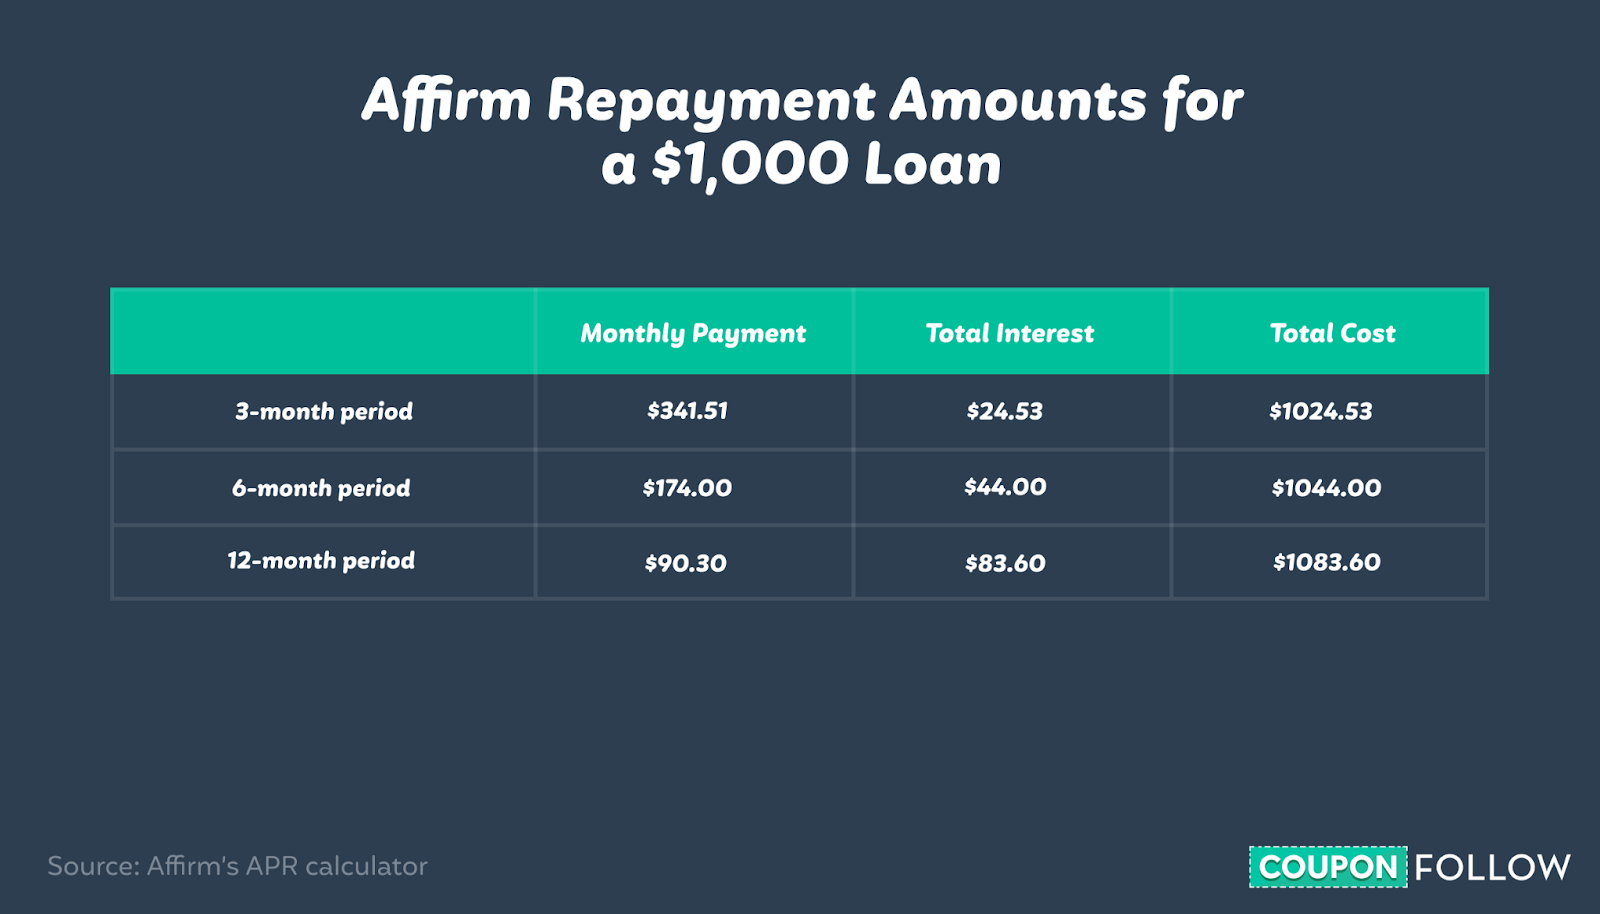 Table showing repayment amount for a $1,000 loan